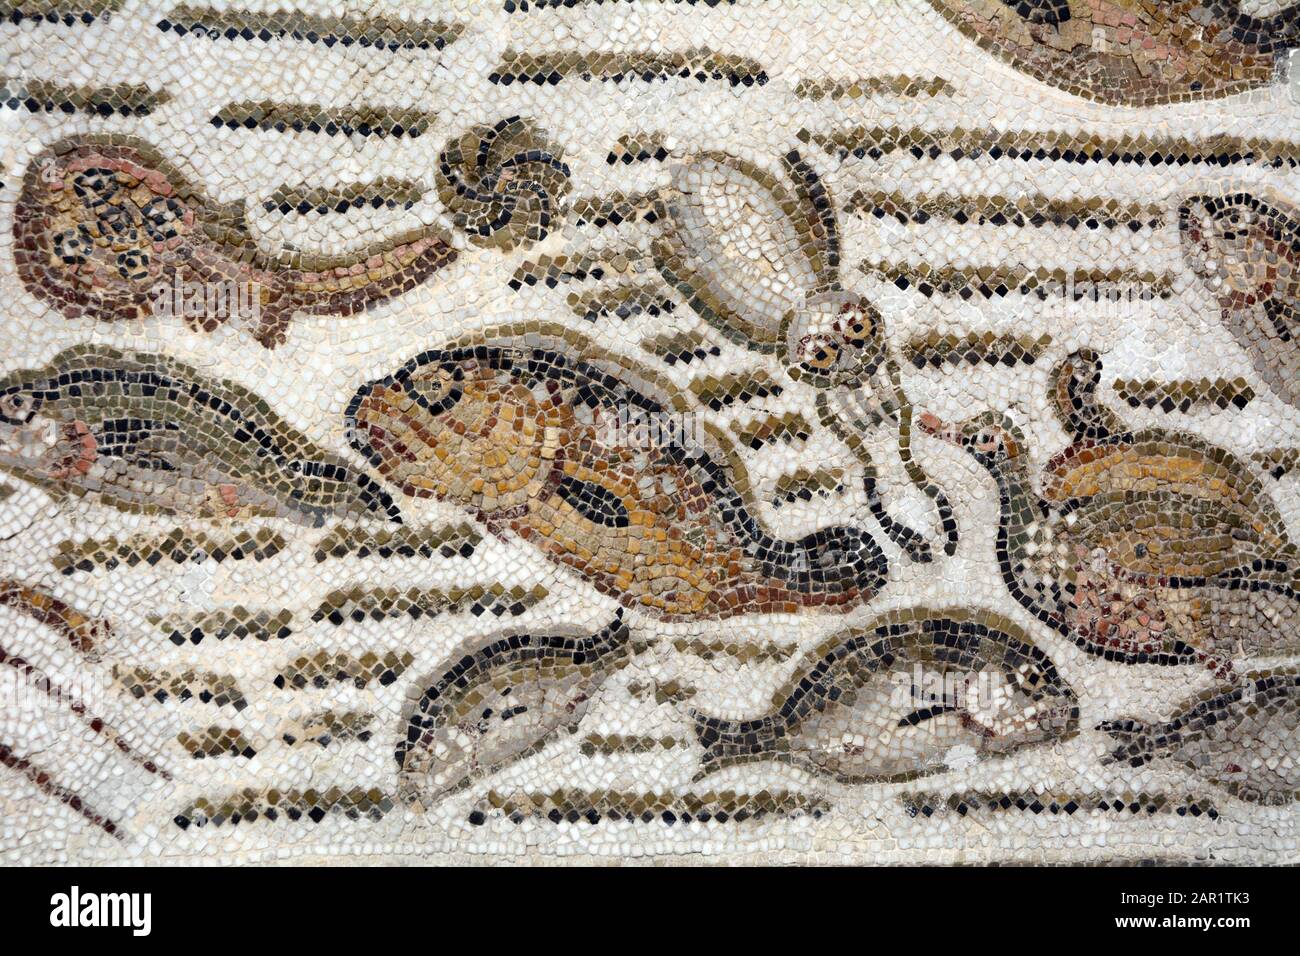 An ancient Roman mosaic from the 4th century A.D. depicting fish and other sea creatures at the Bardo National Museum in Tunis, Tunisia. Stock Photo